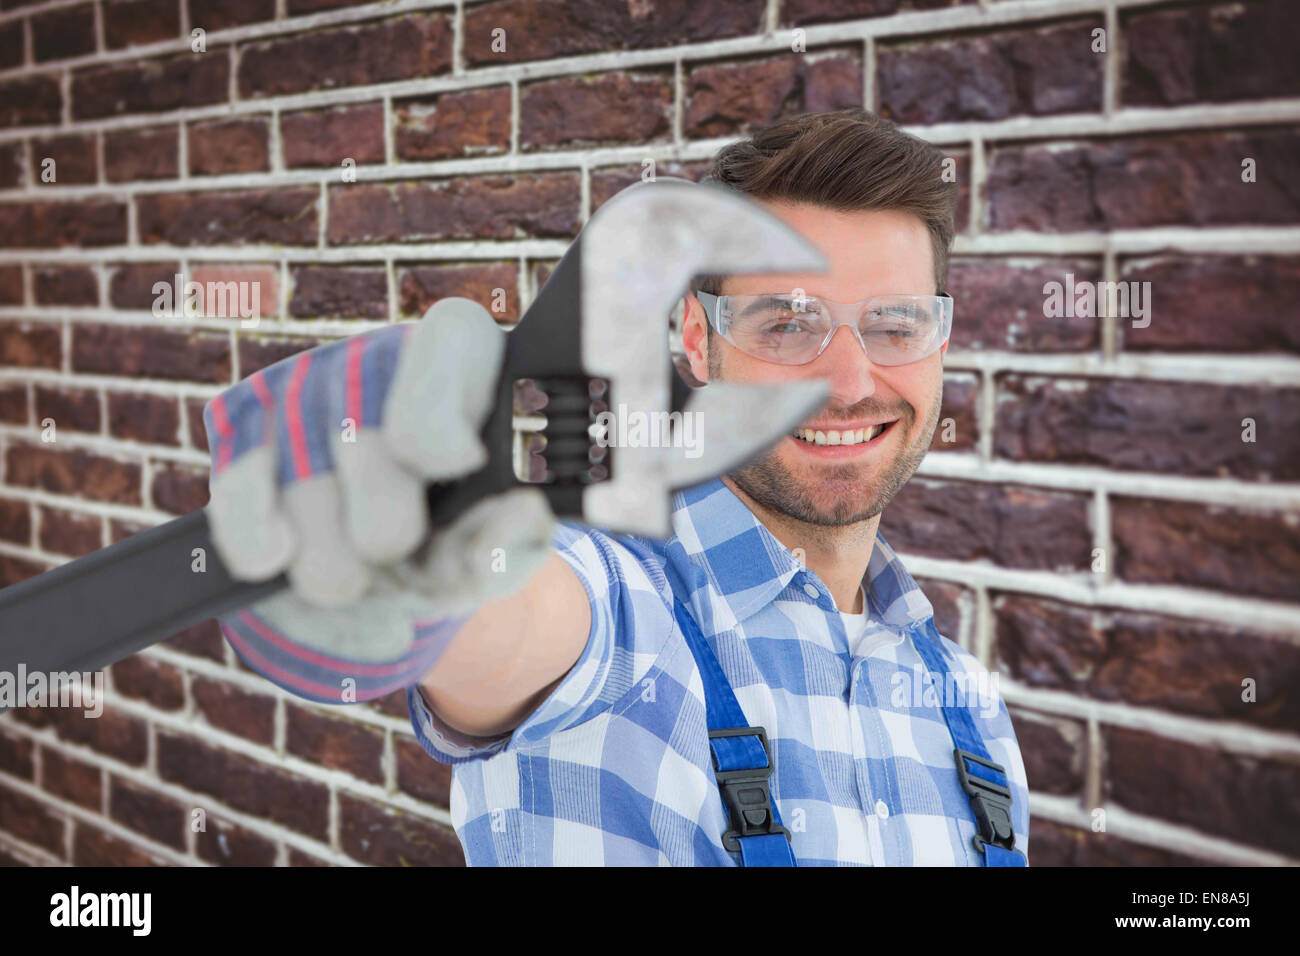 Composite image of handyman wearing protective glasses while holding wrench Stock Photo